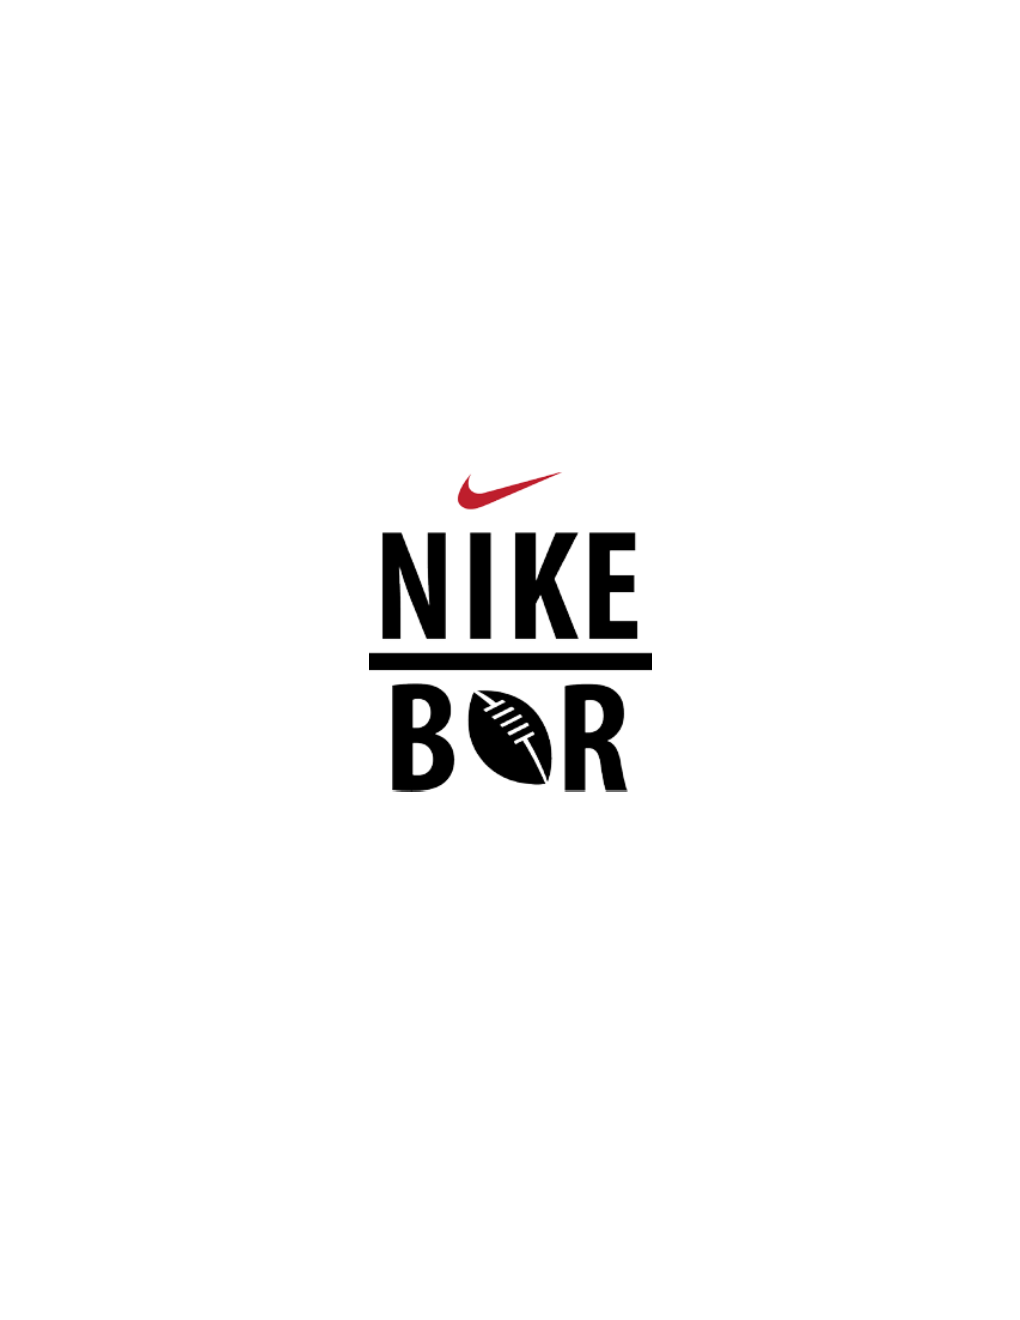 Nike Bar Will Open Every Day from 8 Am to 12 Am, and These Opening Hours Are Not Provided by Its Competitors